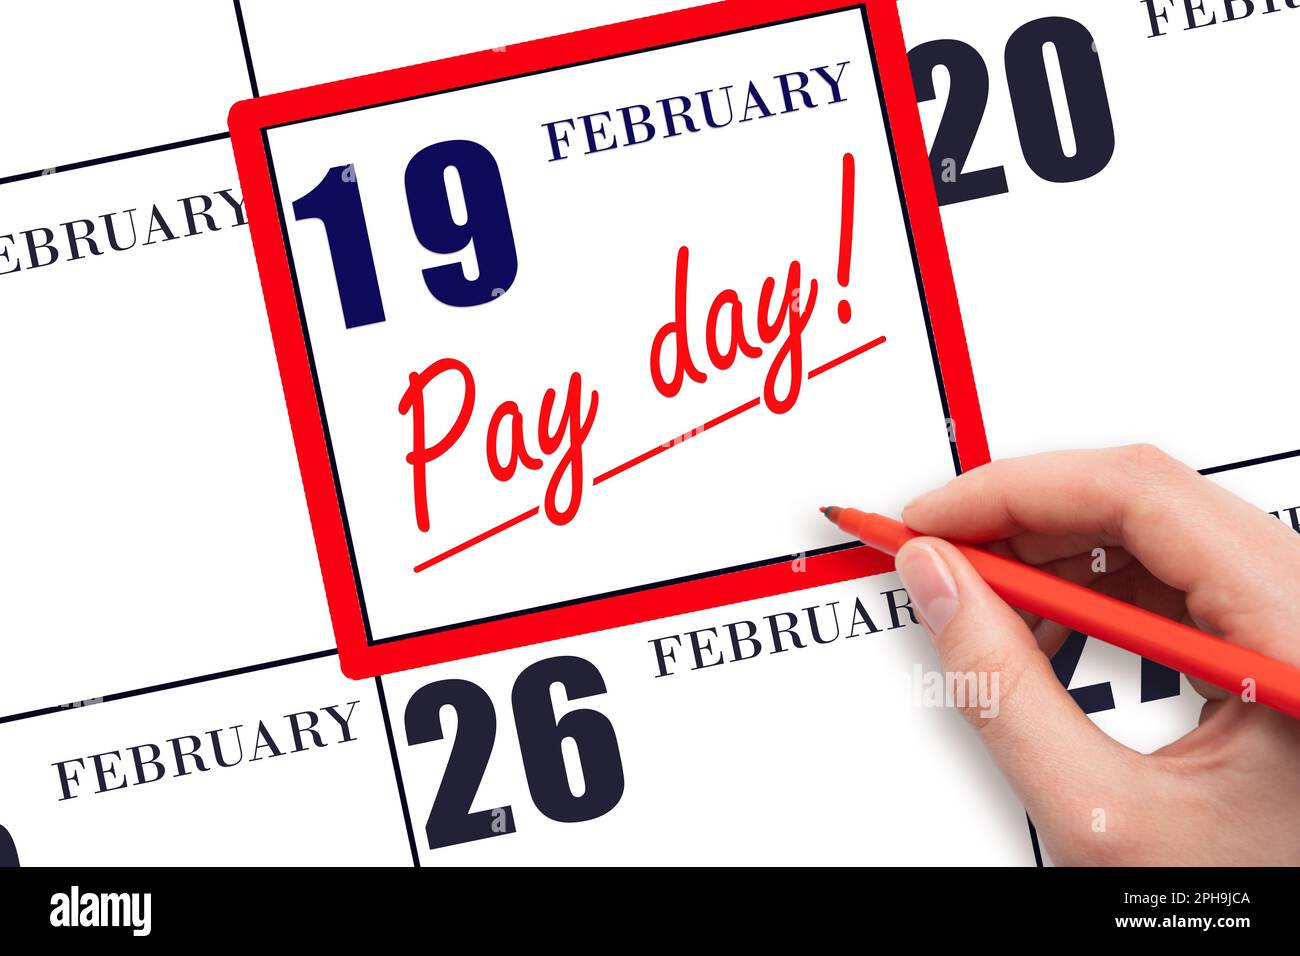 19th day of February. Hand writing text PAY DATE on calendar date February 19 and underline it. Payment due date.  Reminder concept of payment. Winter Stock Photo